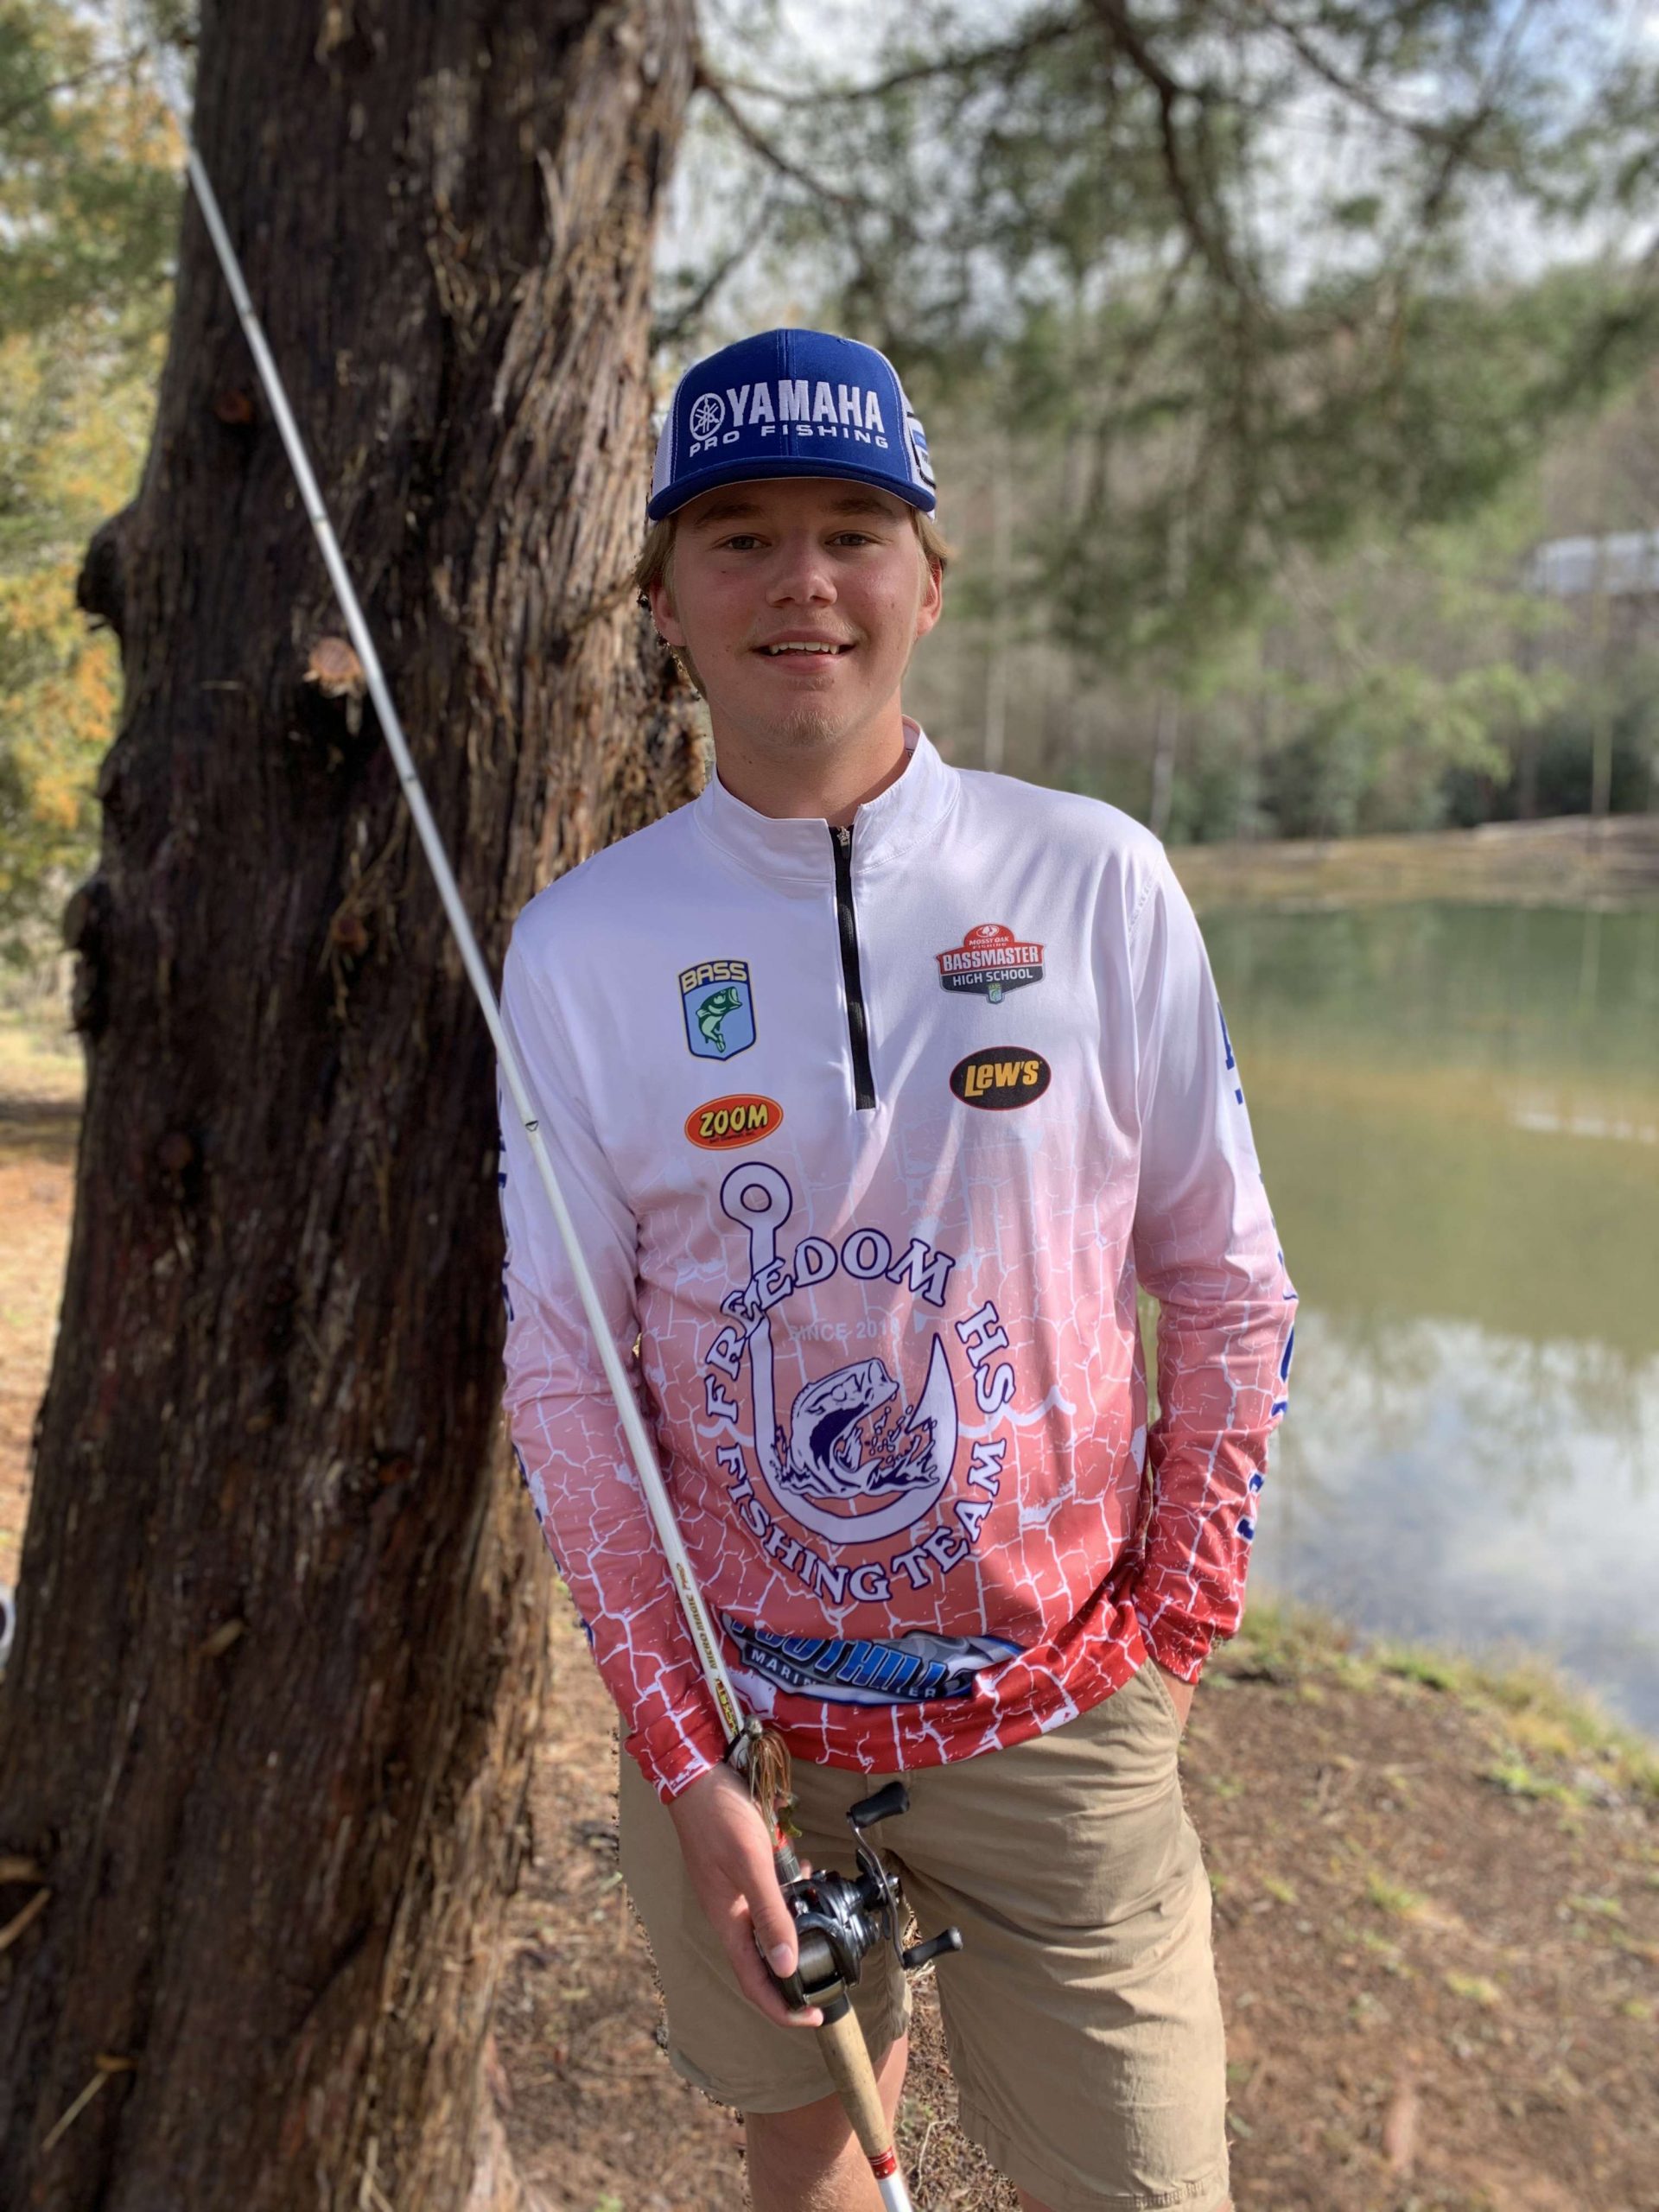 <p><strong>Hunter Keller, Morganton, N.C.</strong></p><p>Hunter Keller, a senior at Freedom High School, won three tournaments in the 2020 season, as well as two Top 5s and three Top 20s, including a sixth-place finish in the Bassmaster High School National Championship, which featured a field of 240-plus boats. He also competed in the Foothills Marine Tuesday Night Tournaments, where in the span of 15 tournaments he won once, placed in the Top 5 twice and secured an additional five Top 10 finishes. âHis passion for fishing led him to start the Freedom High School Bass Team,â said Dustin Haigler, Freedom High School club advisor. âSince its initiation, the club has performed exceptionally well in tournaments but also in reaching out to help serve local businesses and supporters, all of which Hunter has had a direct influence over.â Keller was the highest-placing Yamaha Engine in the Bassmaster High School National Championship, which netted him $10,000 through the Yamaha Power Pay program. He was the eighth recruit in the nation for Top Tier Fishing and the first in the state of North Carolina. He currently sits in first place in points standings for the North Carolina High School B.A.S.S. Nation and finished in the Top 5 in 2019 and 2020. Alongside his fishing and community service work, Keller also runs his own lure-making business, Dirty Dawgs Custom Lures, works as a farmhand at a local ranch and works as a seasonal employee at a Christmas tree farm.</p>